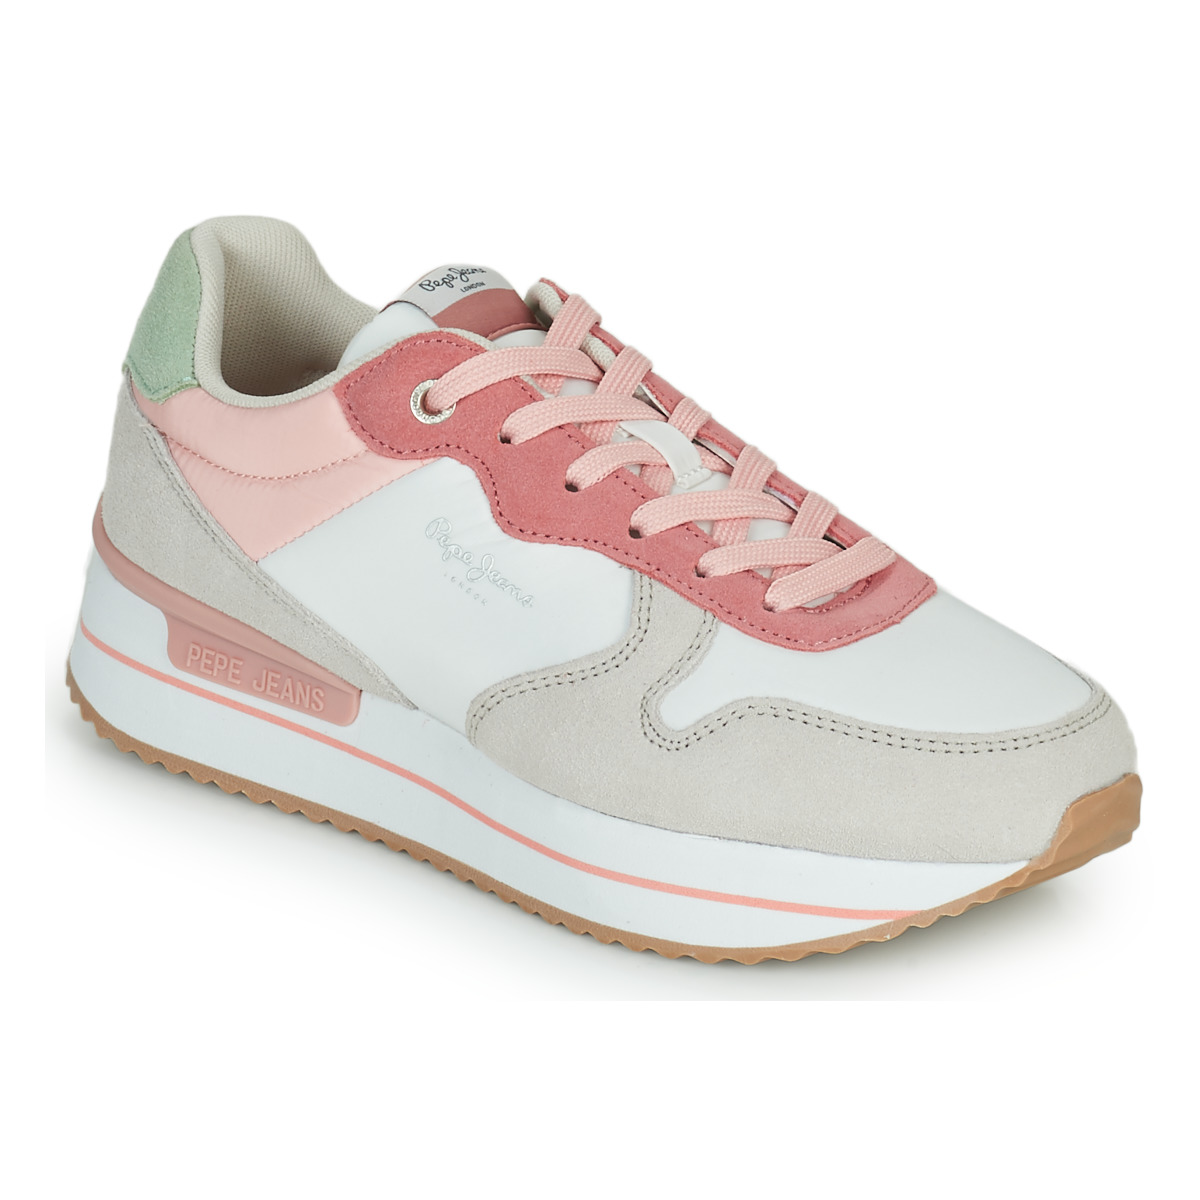 Pepe jeans  Xαμηλά Sneakers Pepe jeans RUSPER YOUNG 22